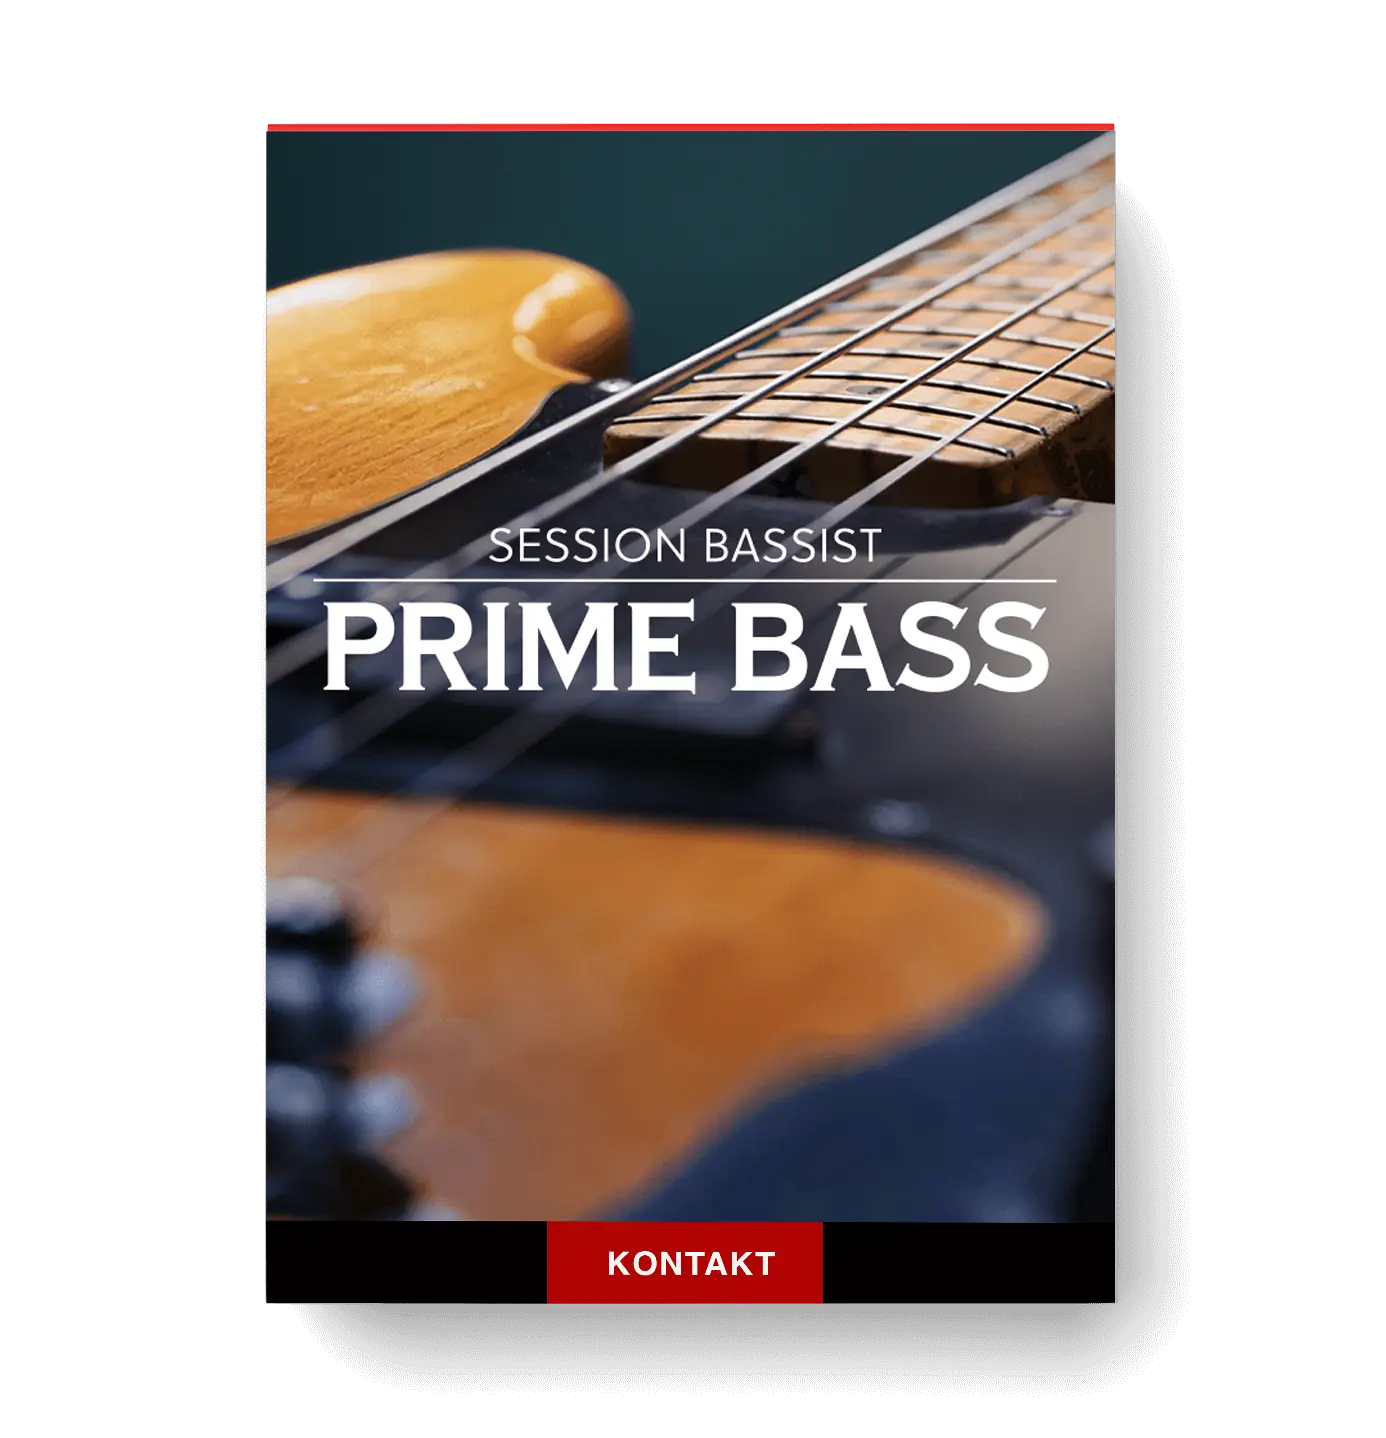 Session Bassist-Prime Bass Download - Extra Plugins